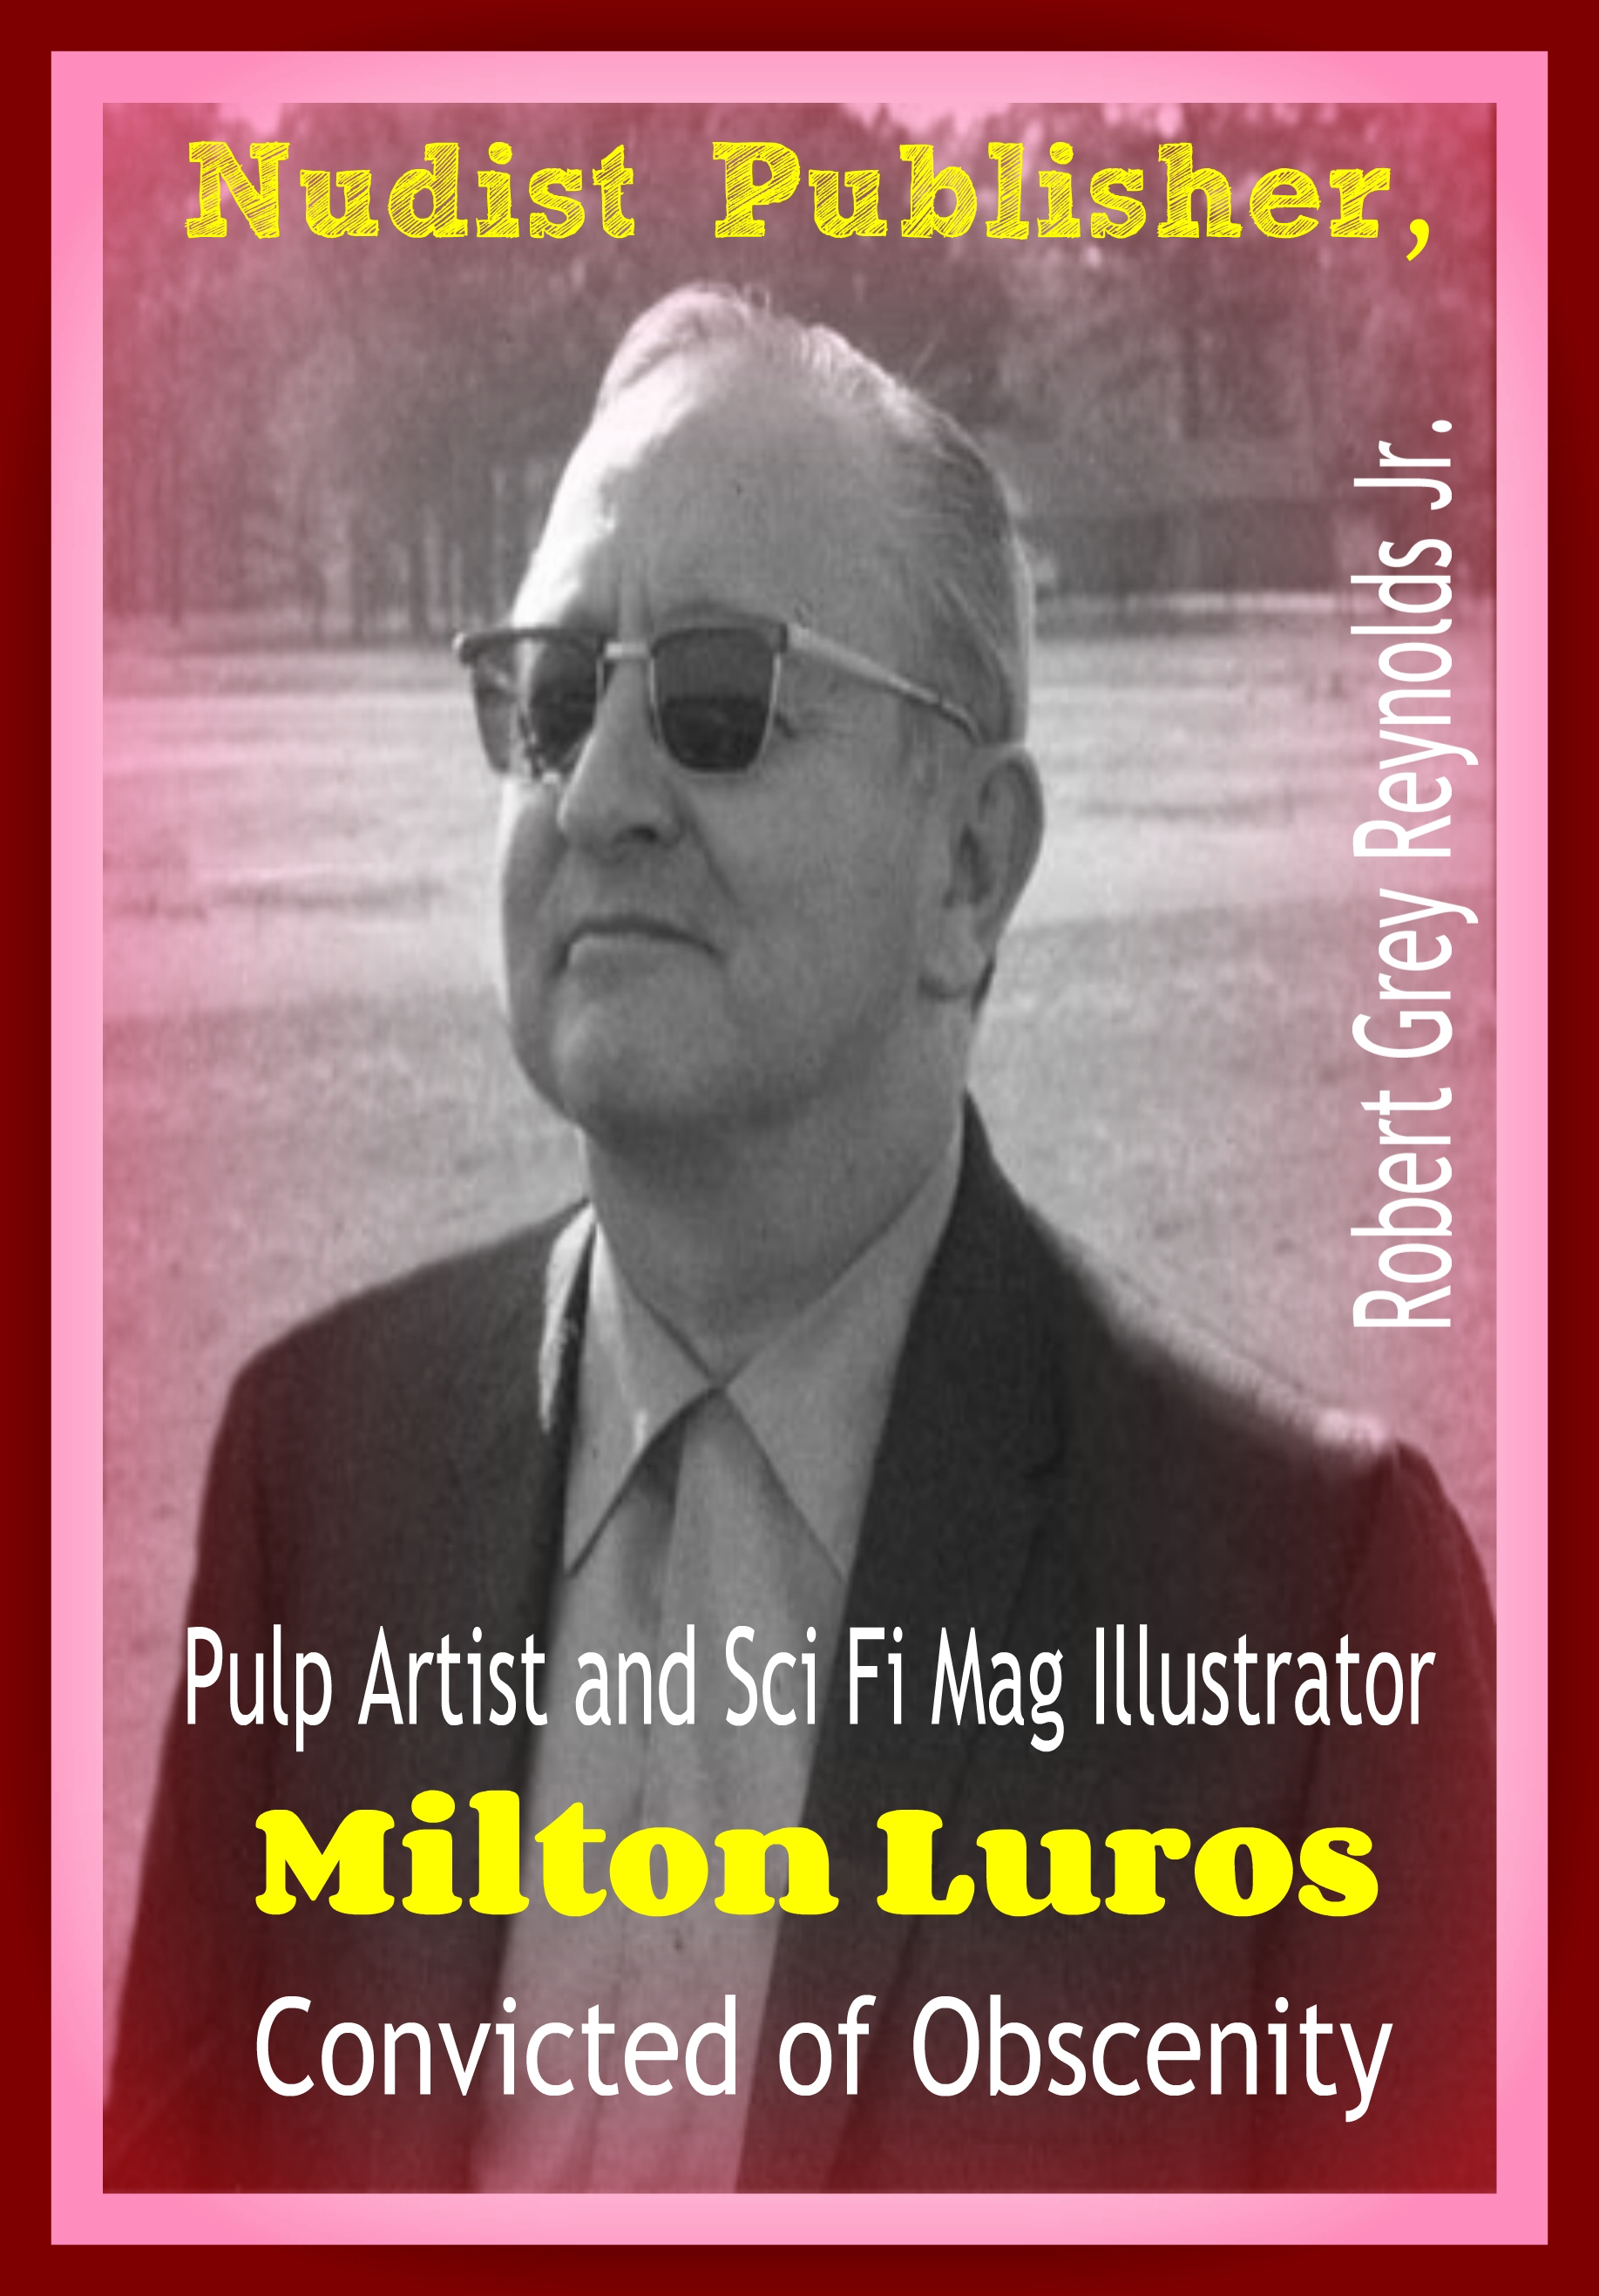 Smashwords â€“ Nudist Publisher, Pulp Artist and Sci Fi Mag Illustrator  Milton Luros Convicted of Obscenity â€“ a book by Robert Grey Reynolds, Jr